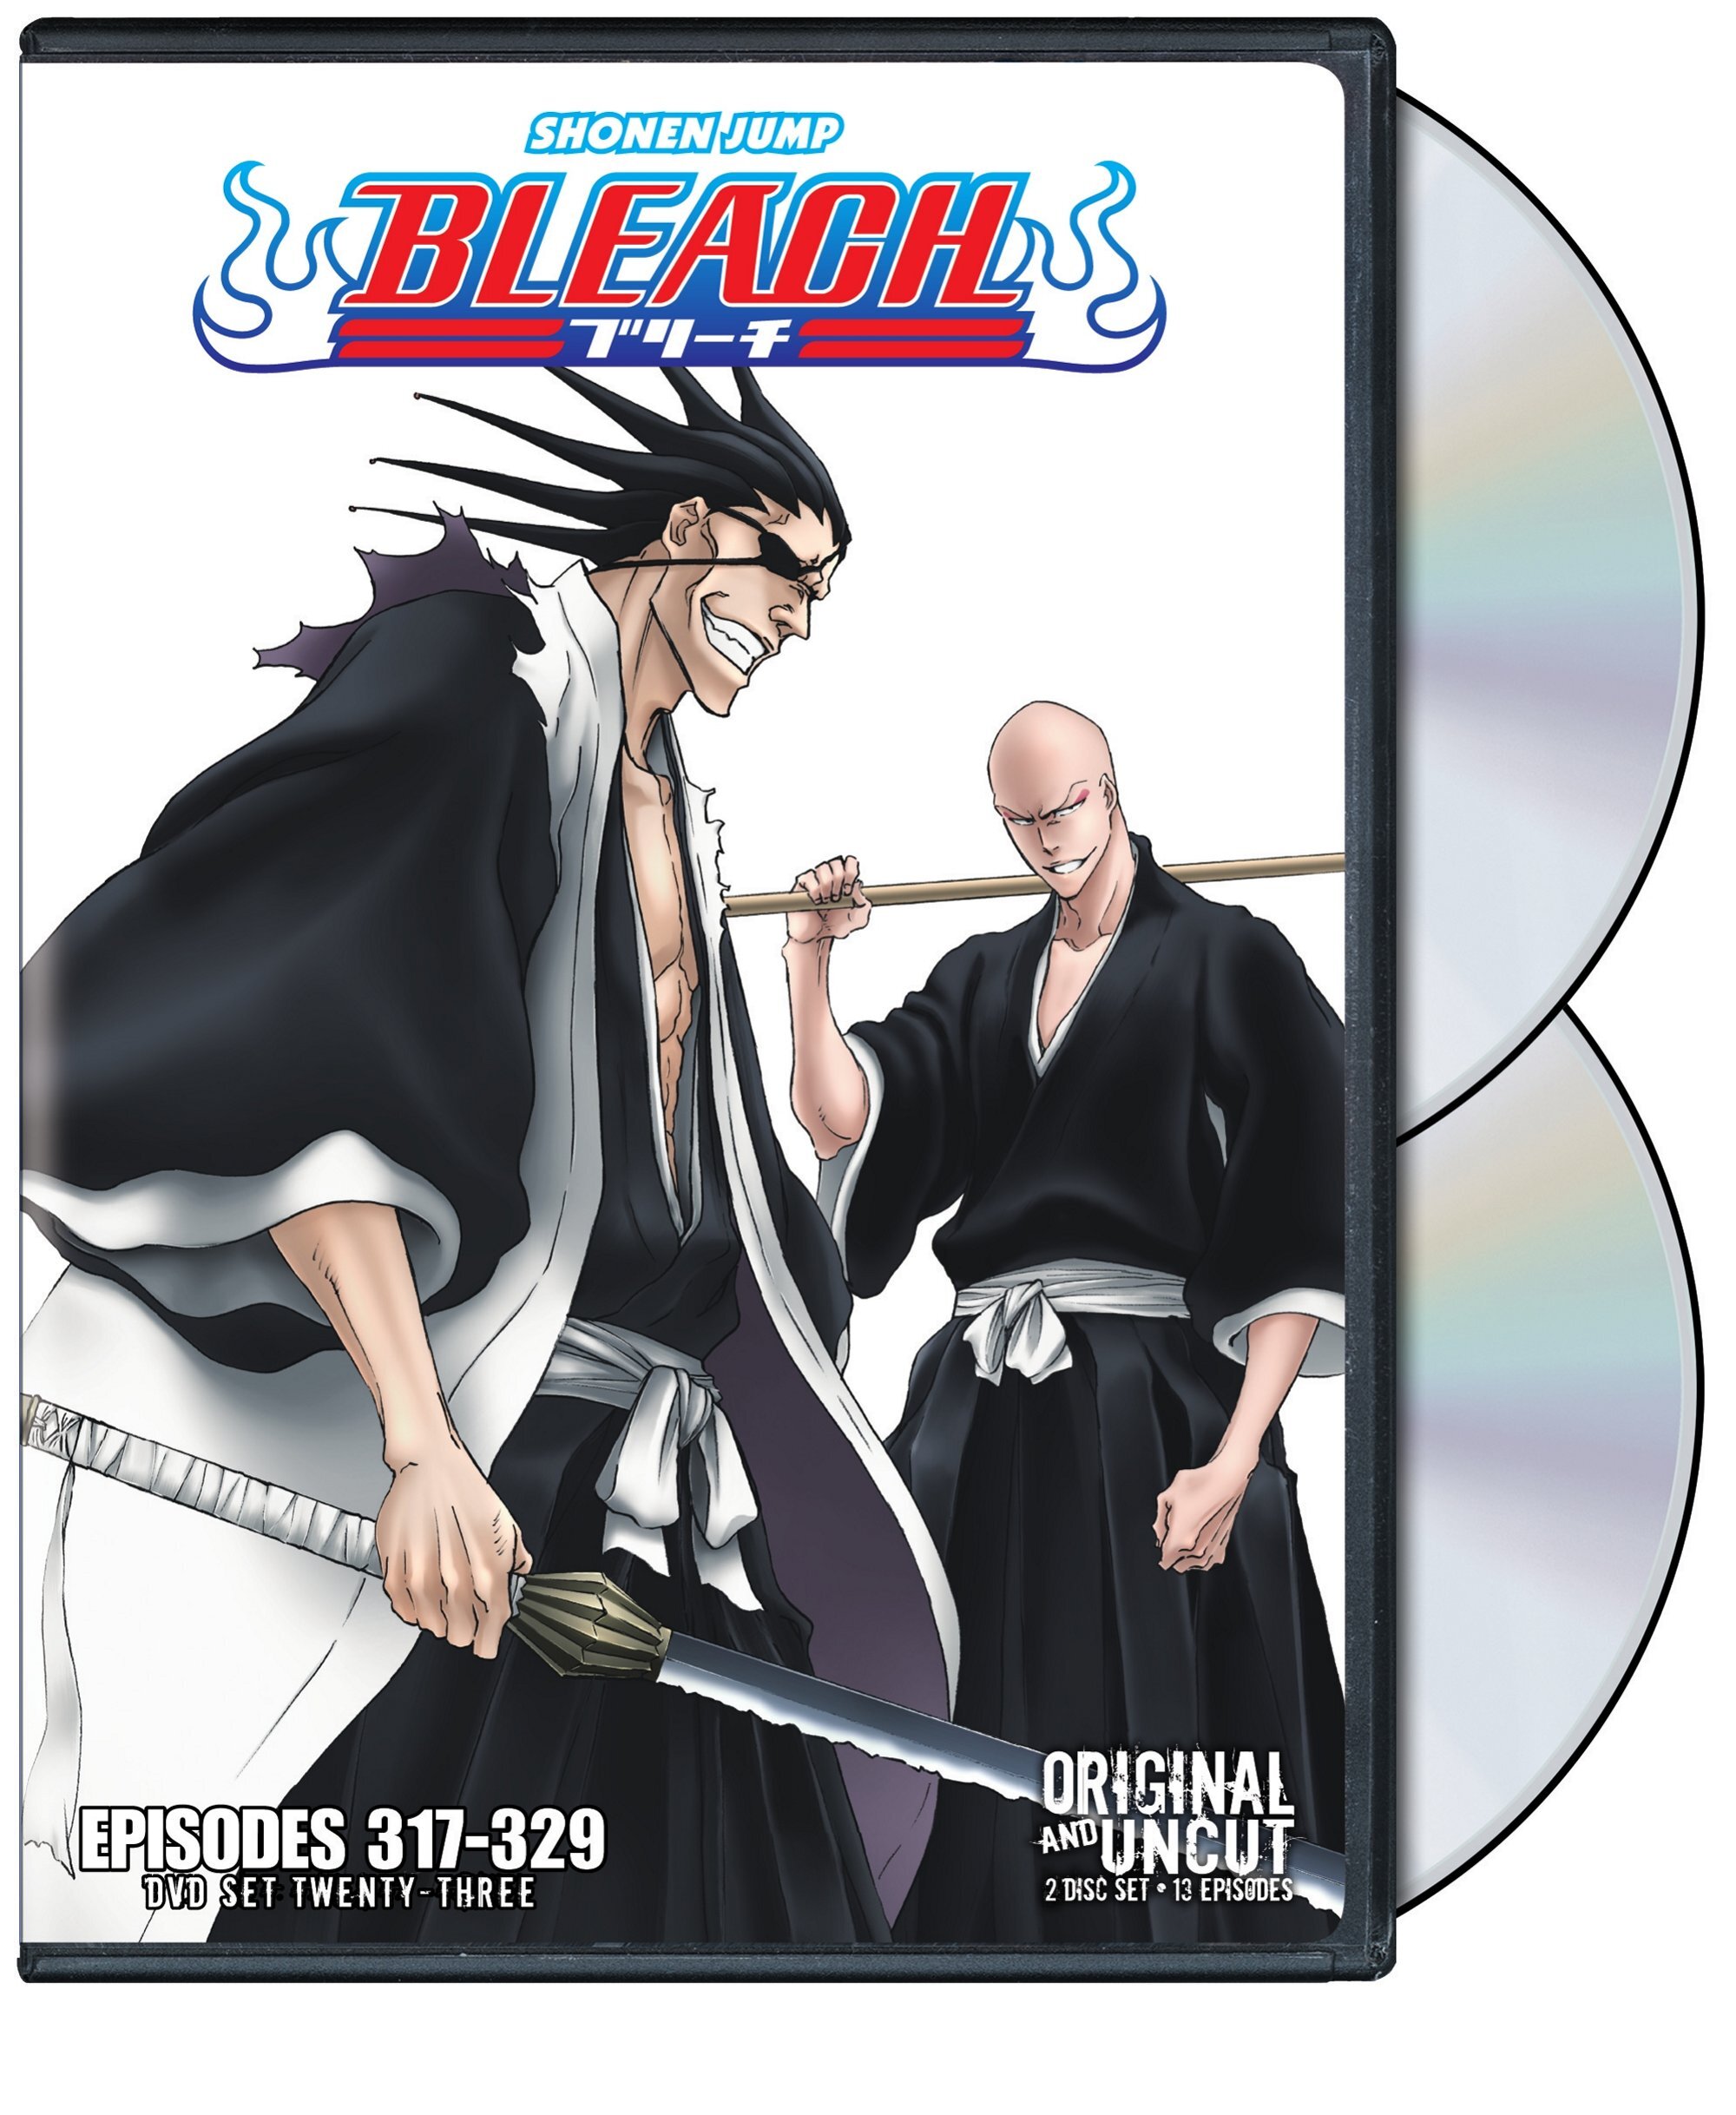 Bleach: Set 23 (Uncut) - DVD [ 2009 ]  - Anime Television On DVD - TV Shows On GRUV